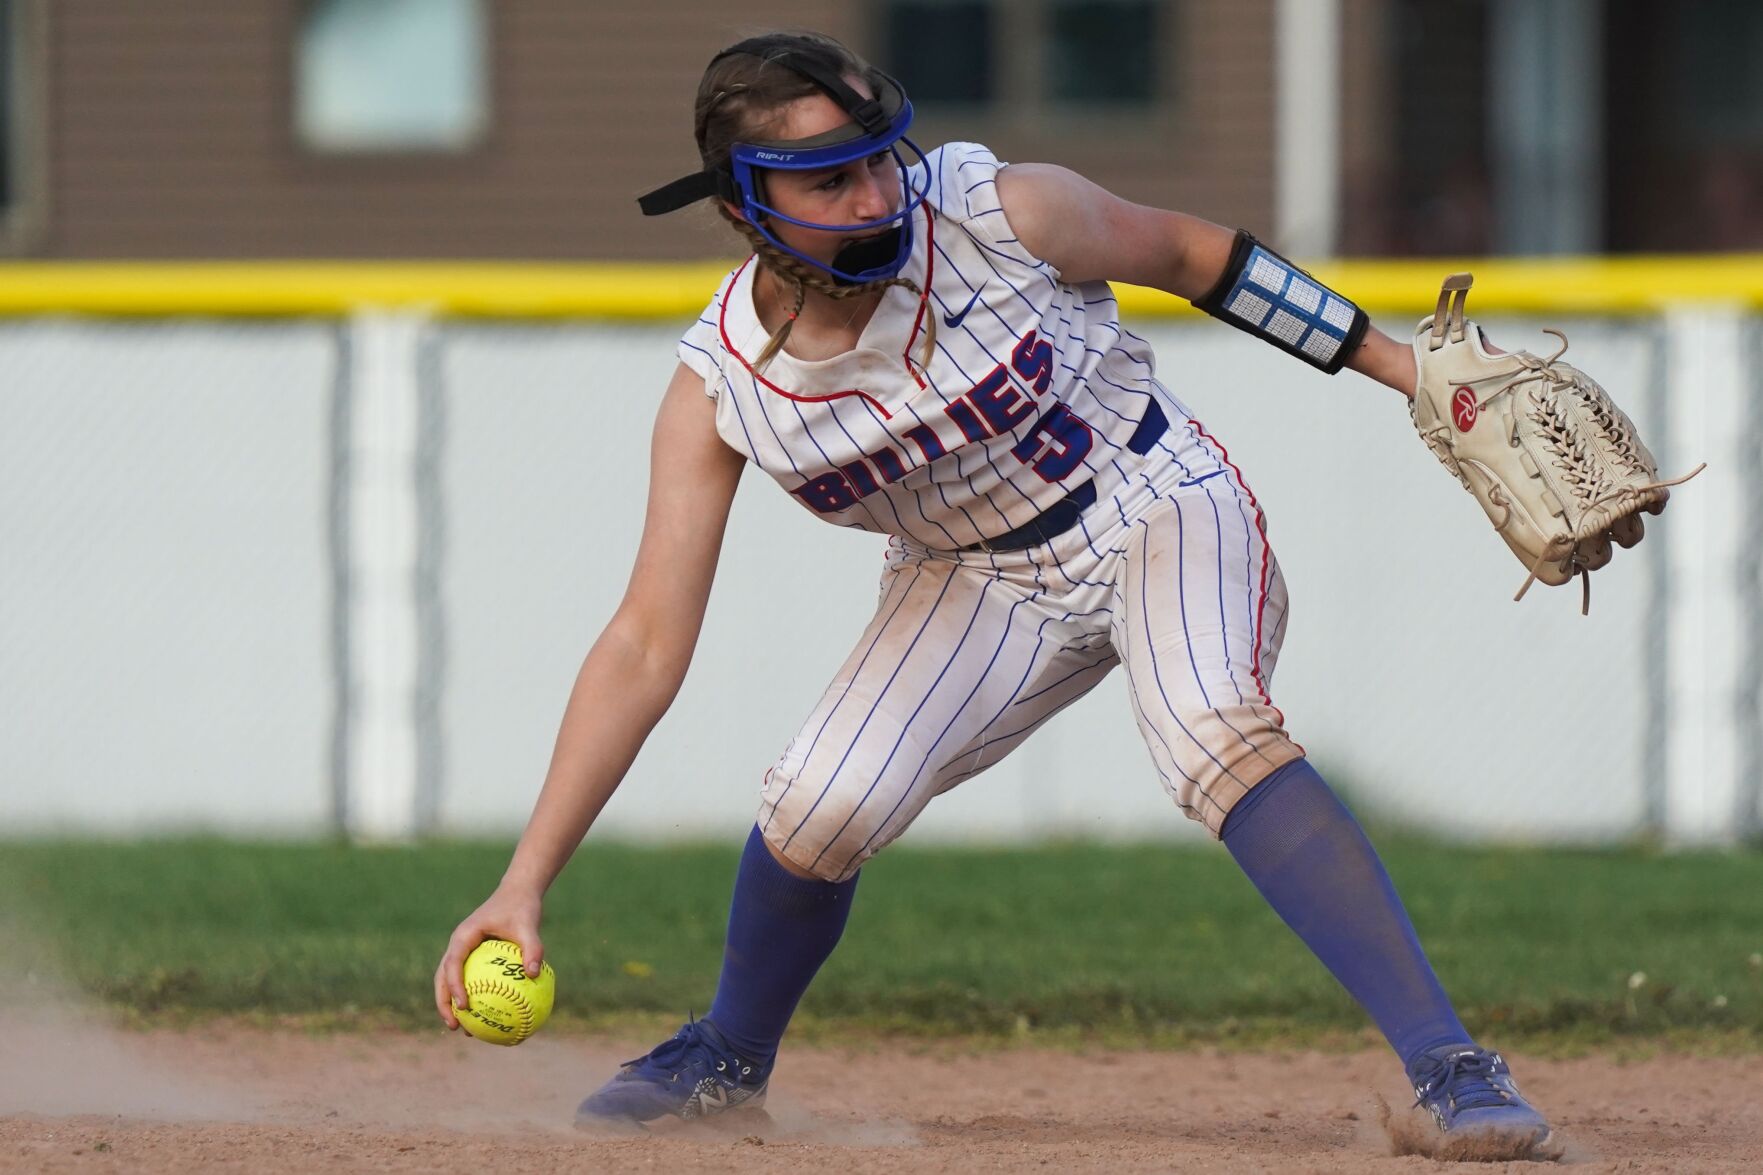 WNY Softball Polls: Orchard Park, Fredonia at top in close votes